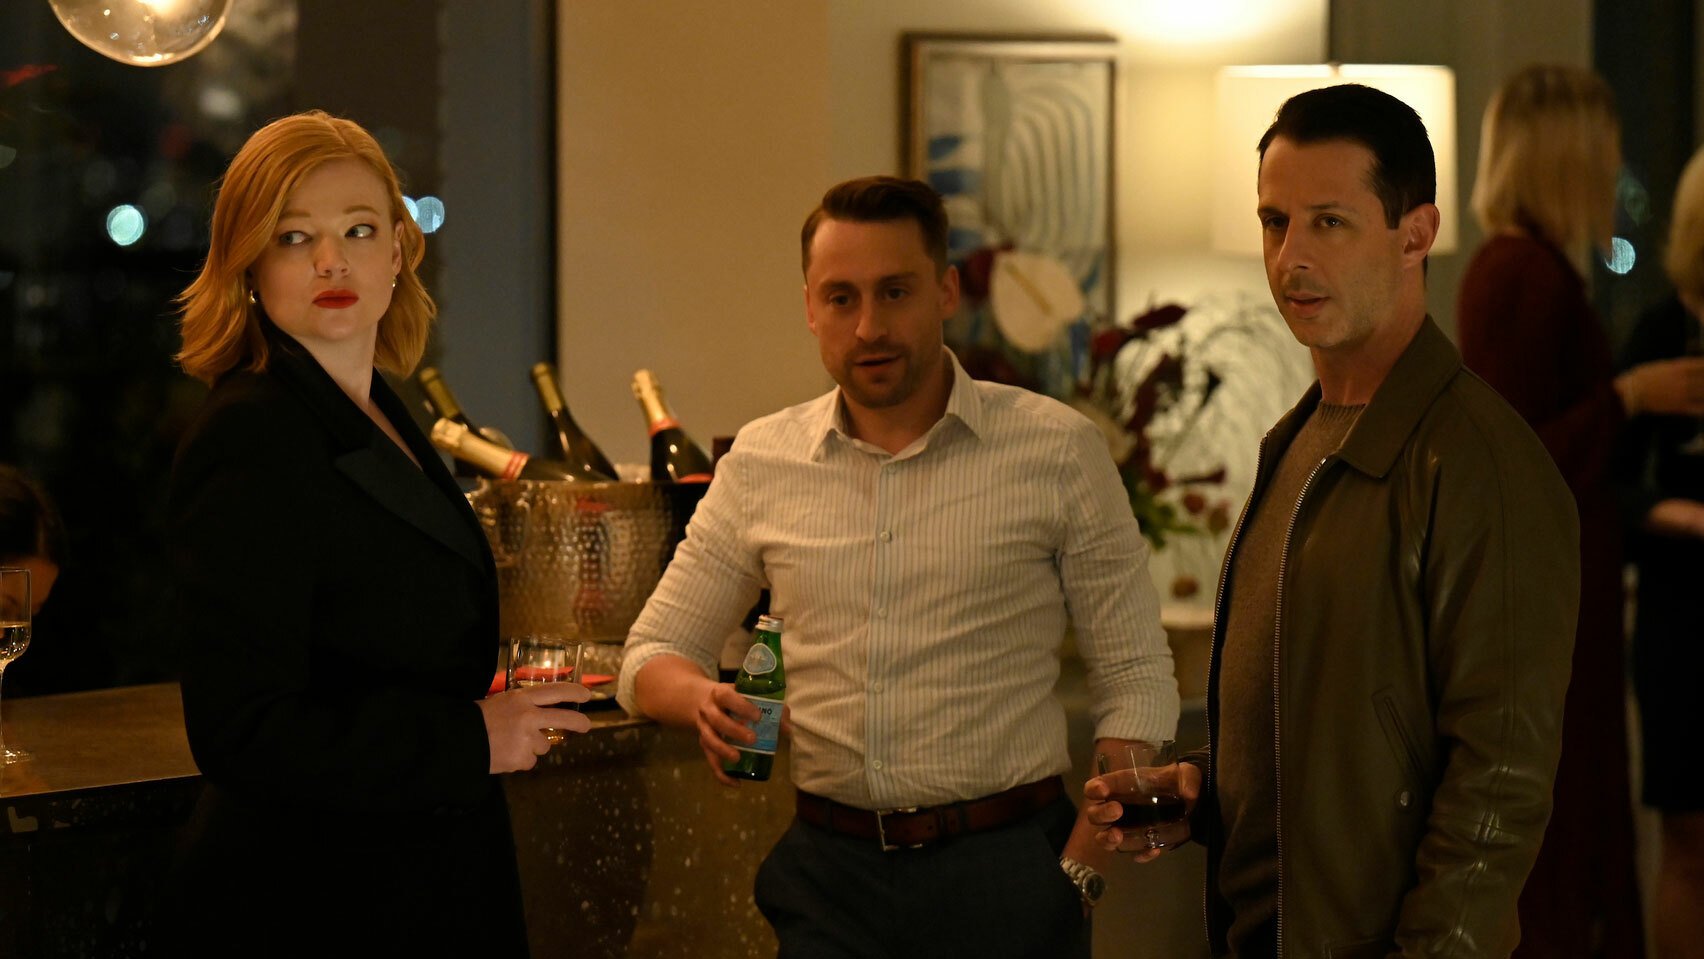 A woman and two men stand holding drinks at a party.